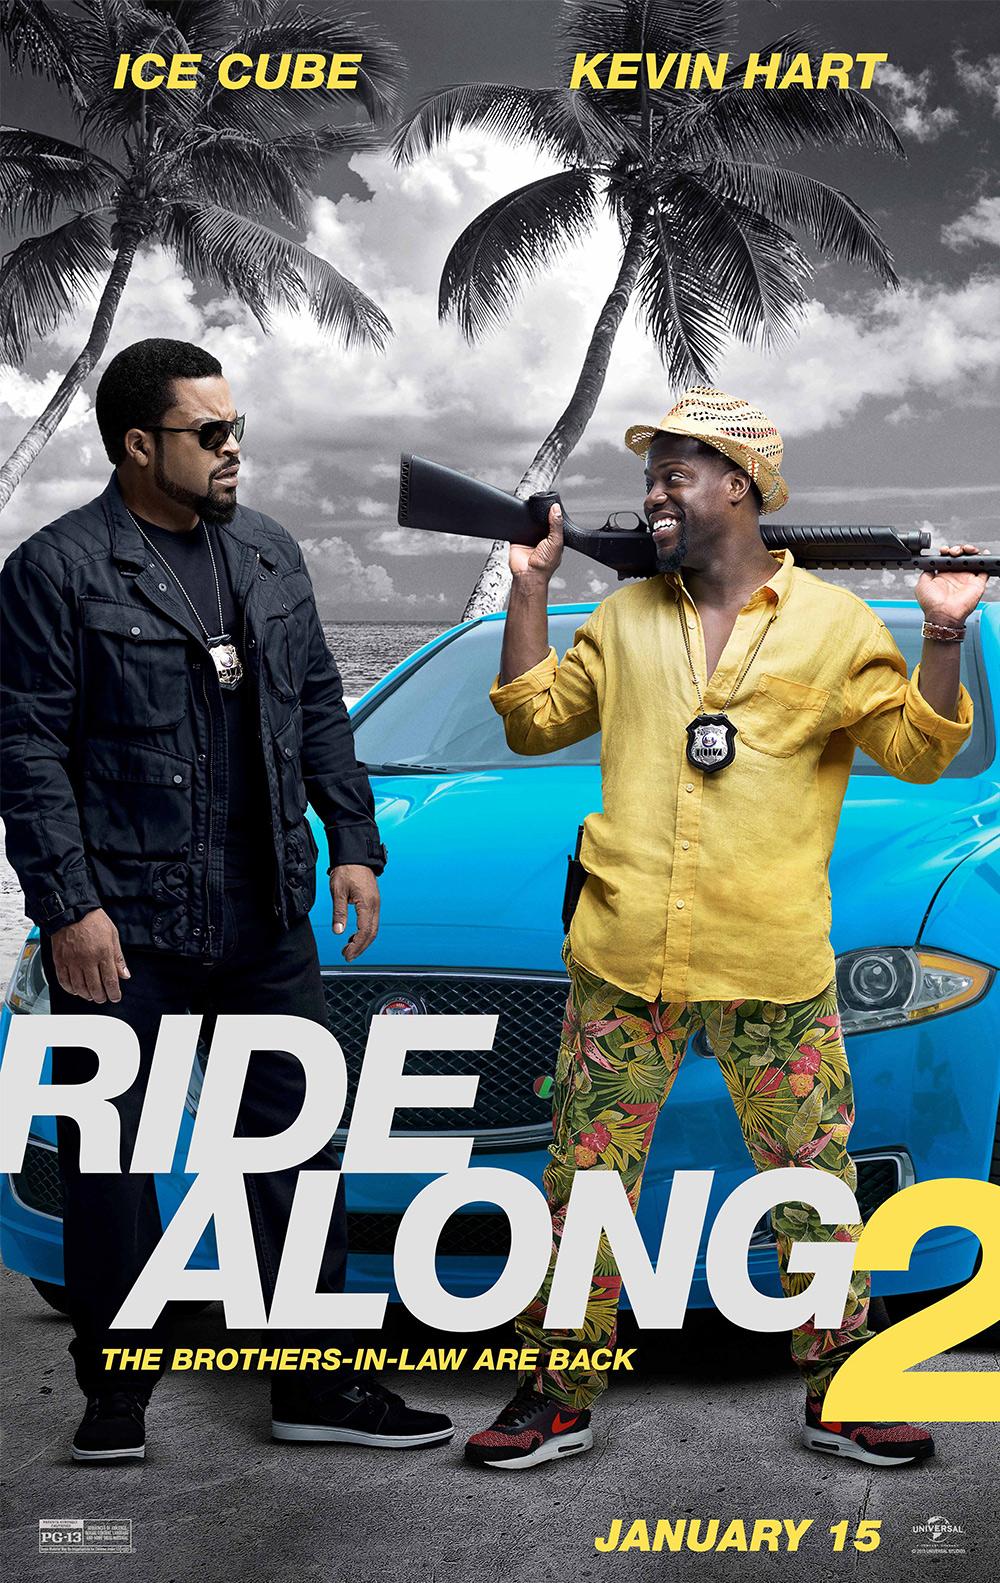 Ride Along 2 Poster. In Theaters Now